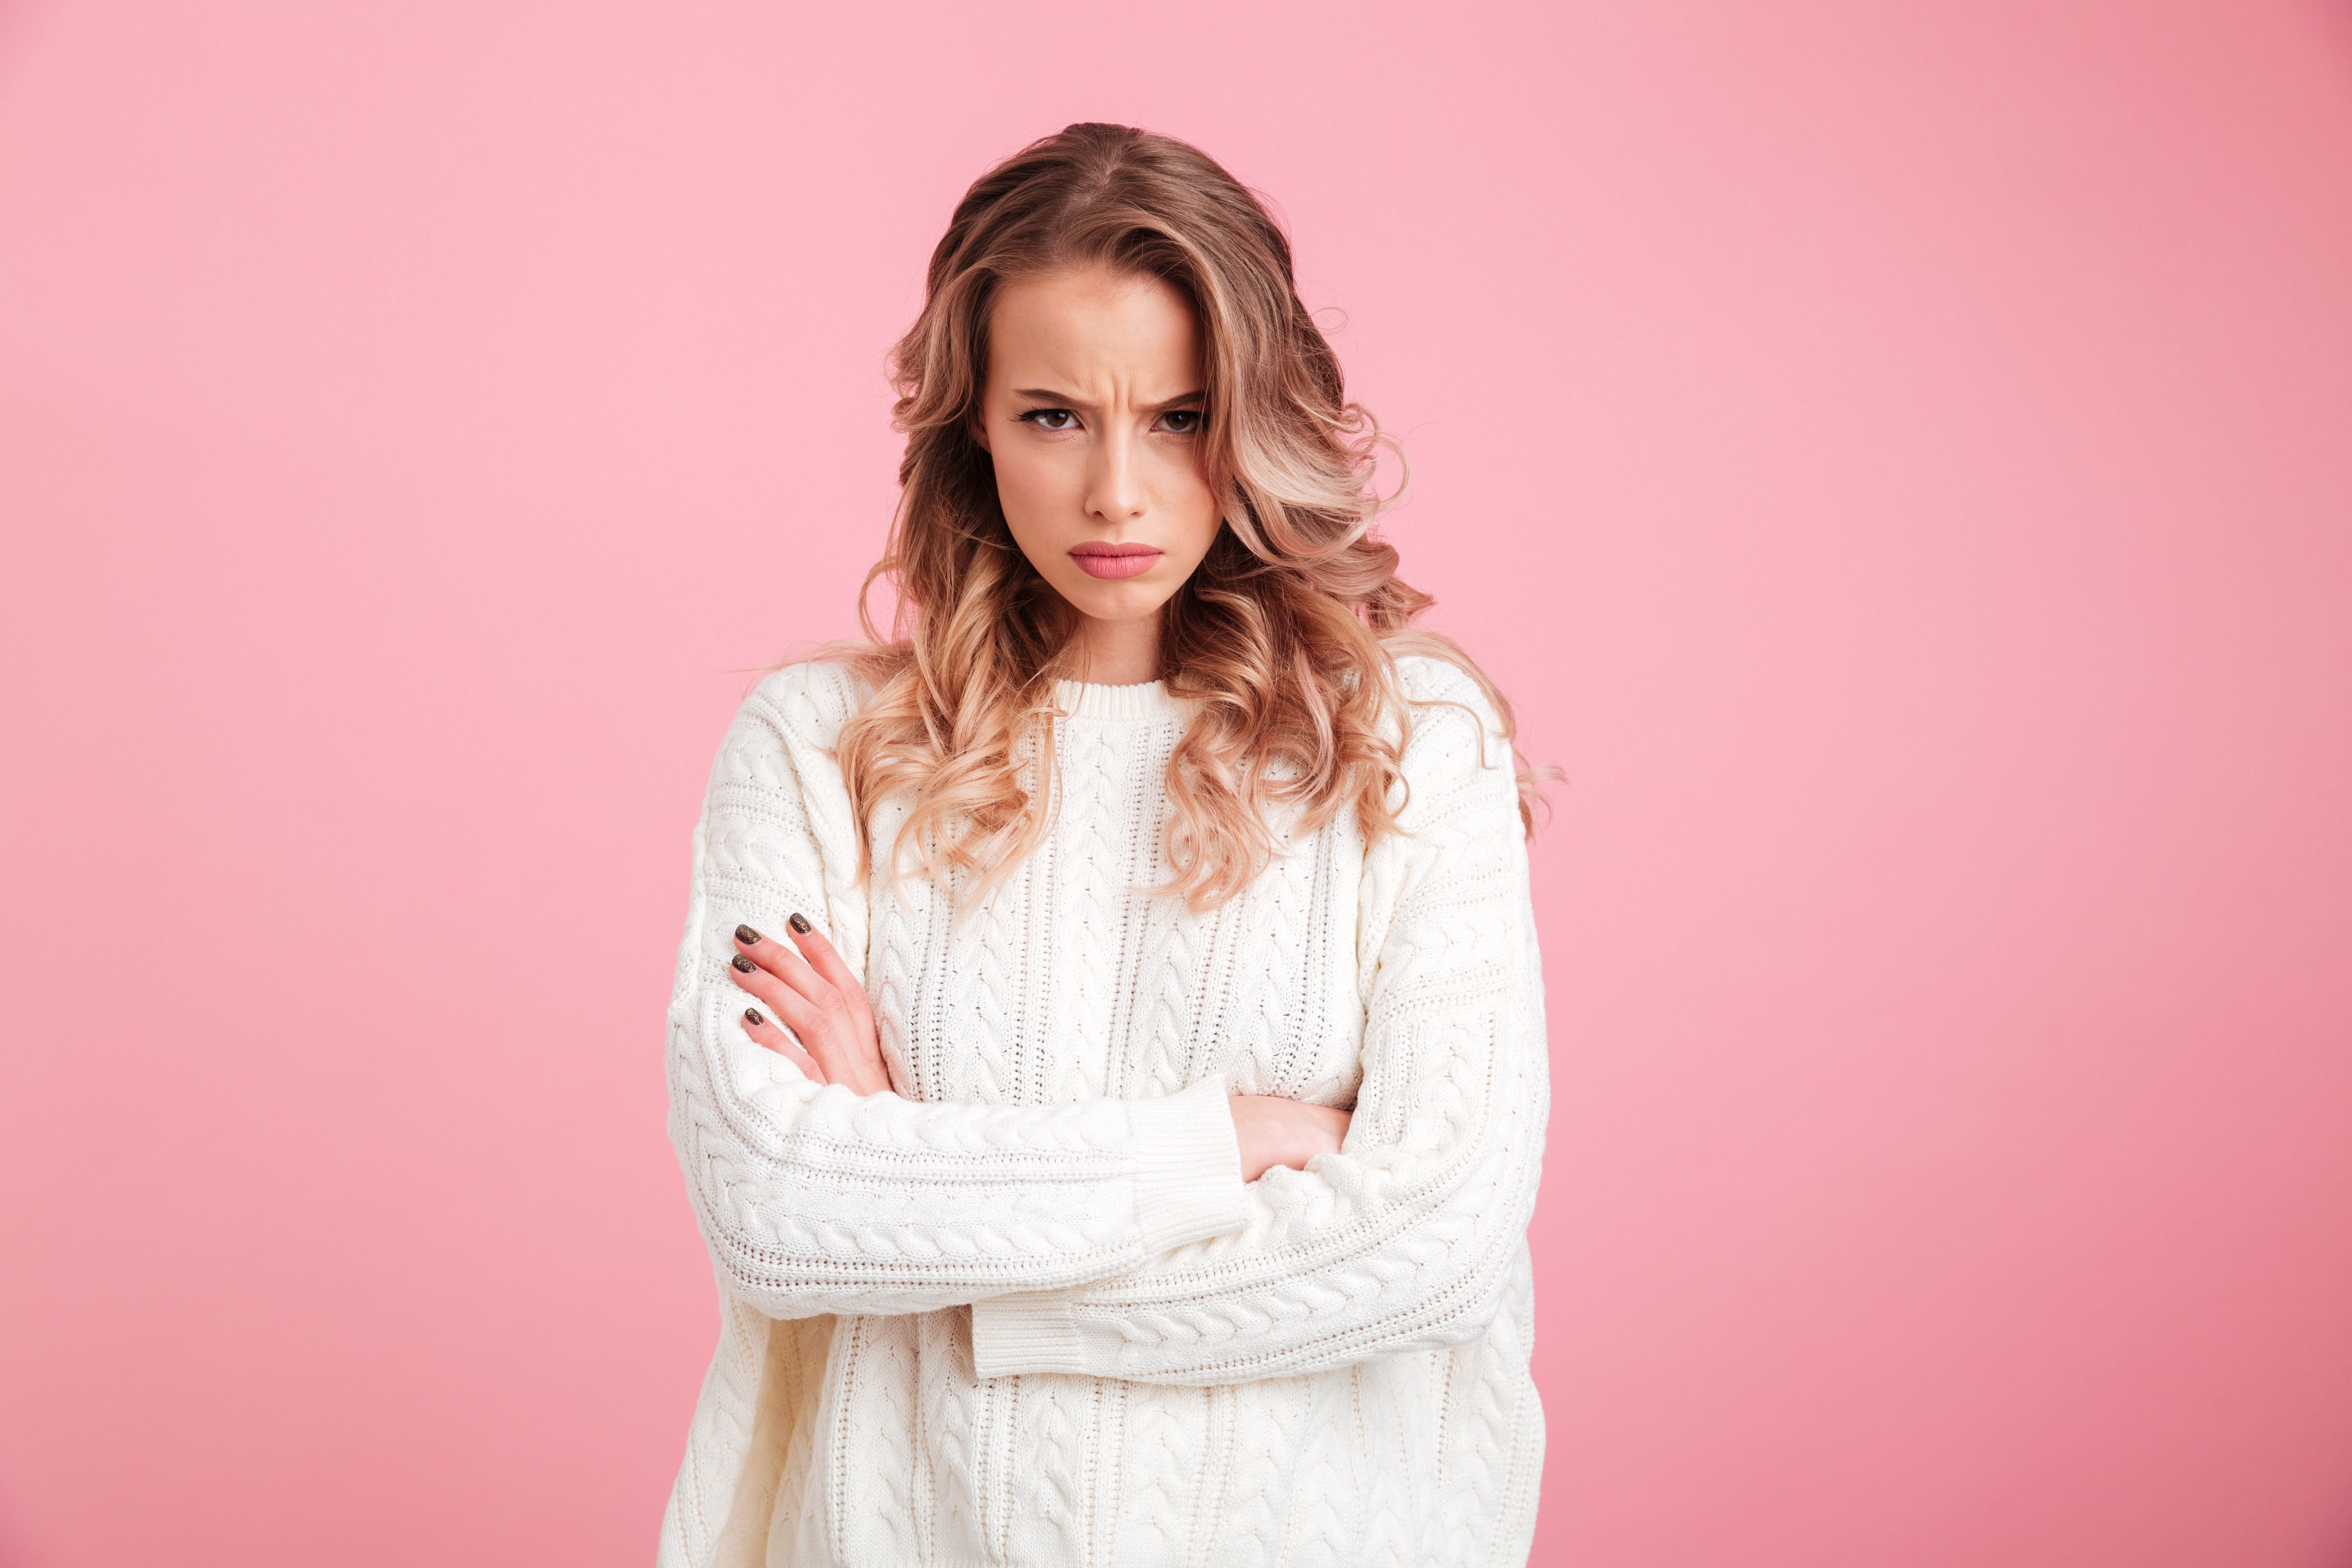 Blonde woman wearing a white jersey in front of a pink background crossing her arms and staring angrily into the camera. | Photo: Shutterstock